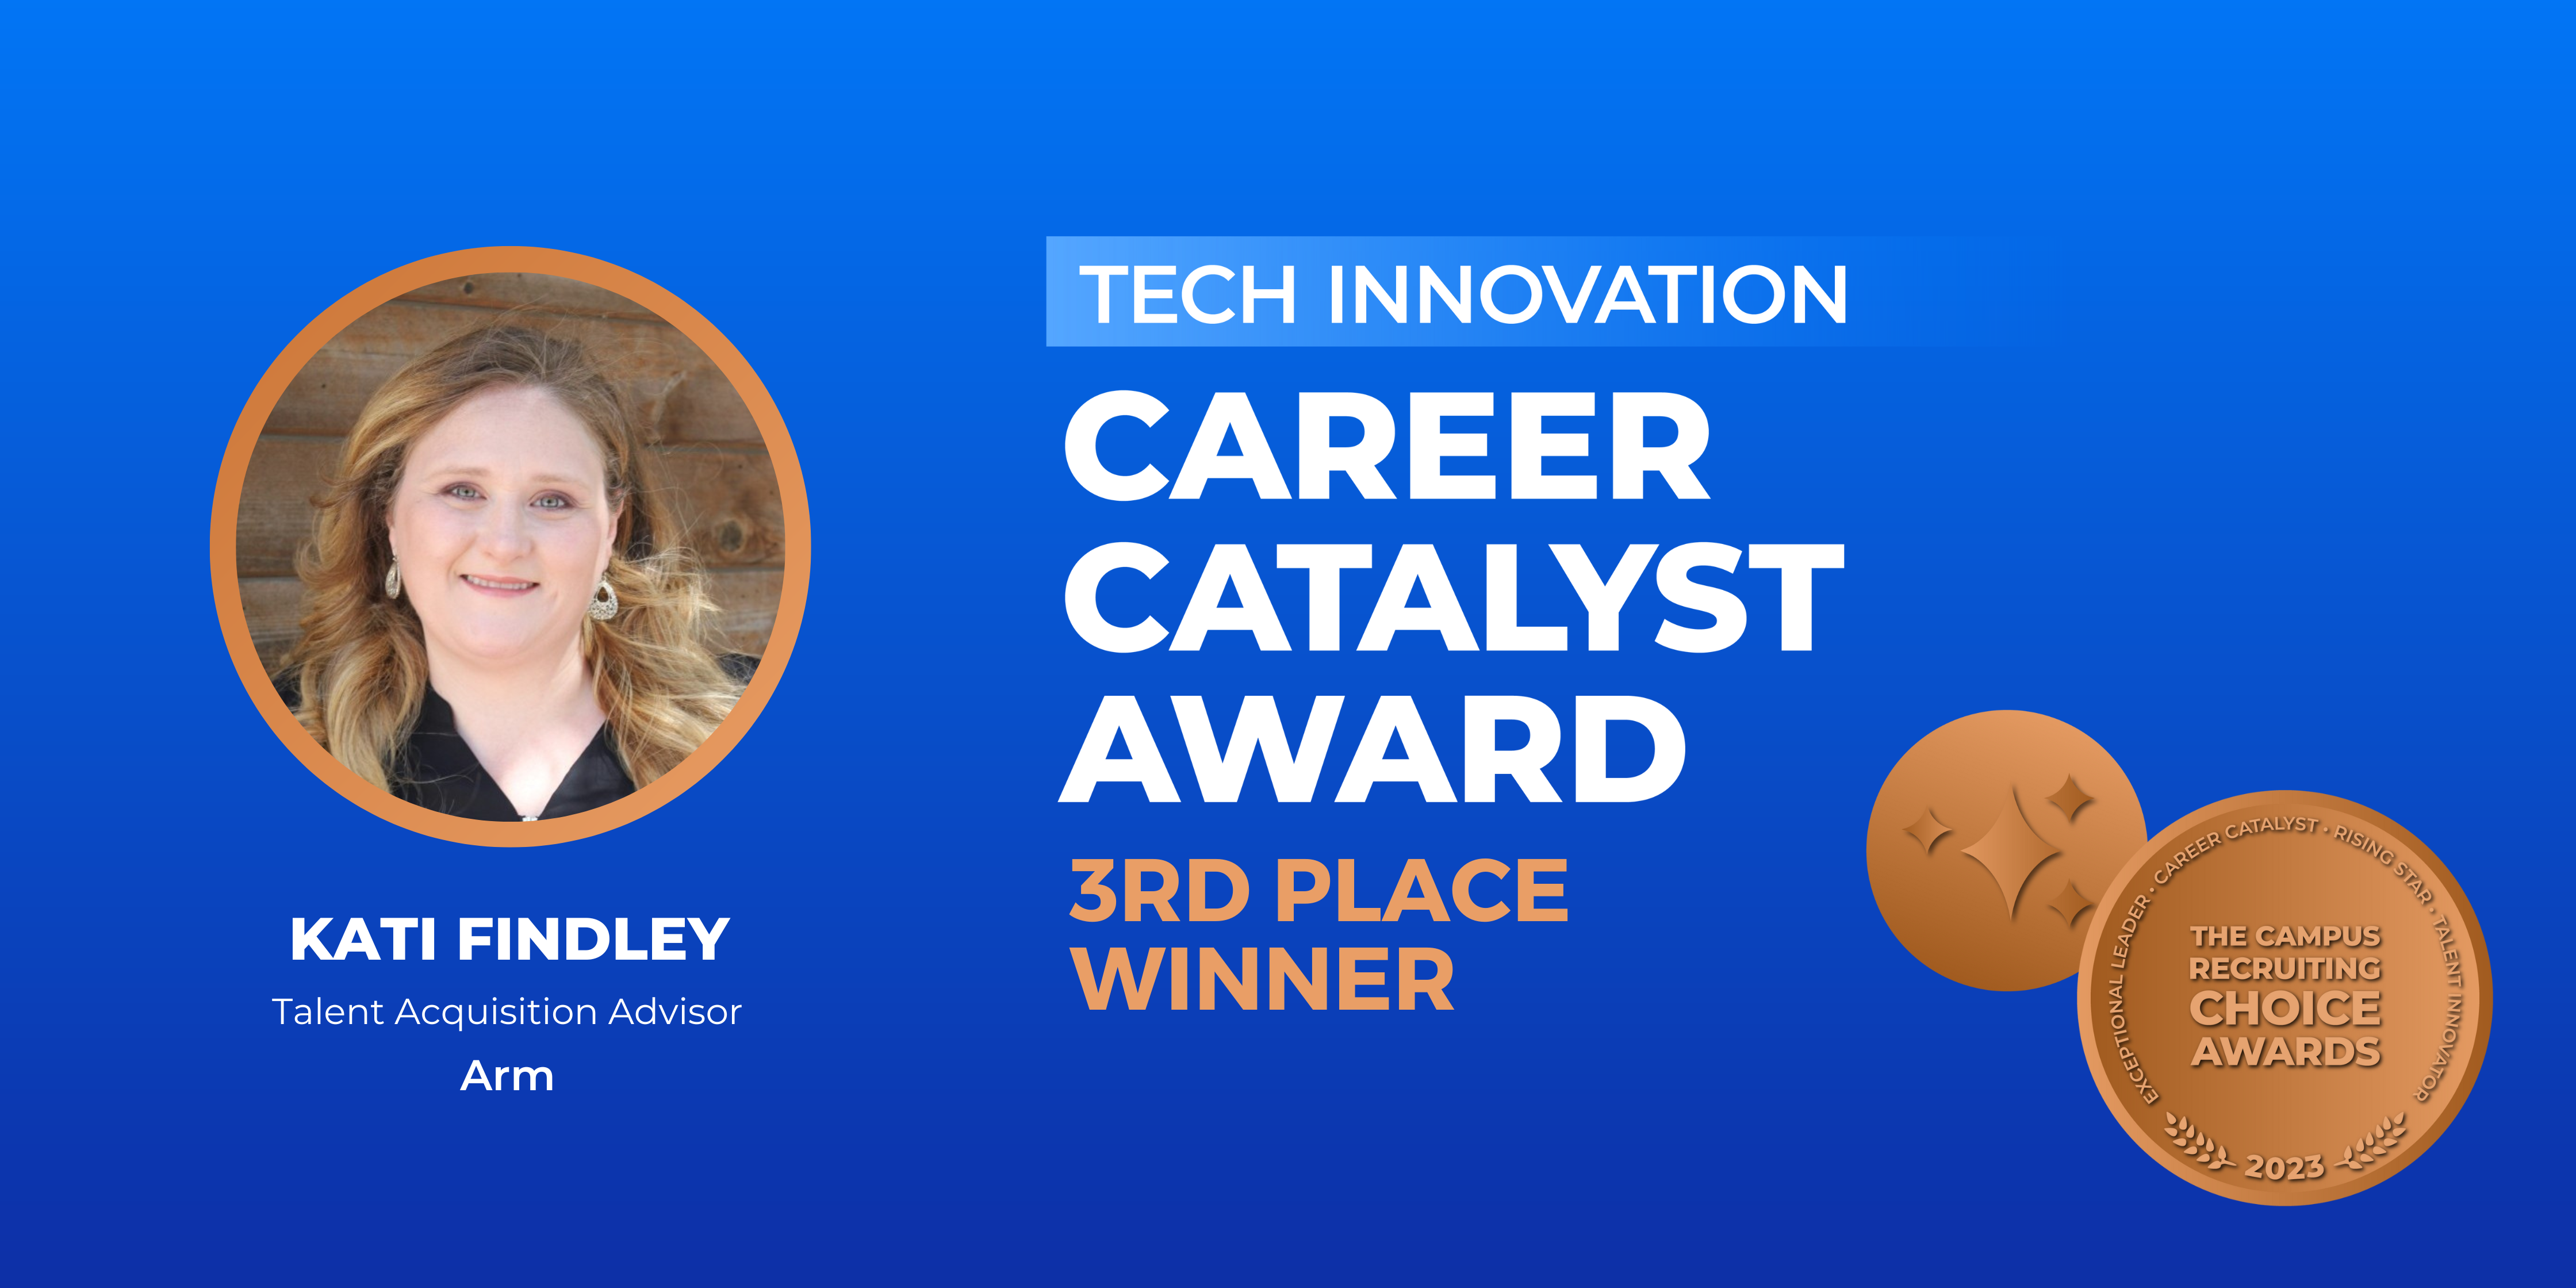 CAREER CATALYST - Tech Innovation - 3rd Place Winner - Kati Findley